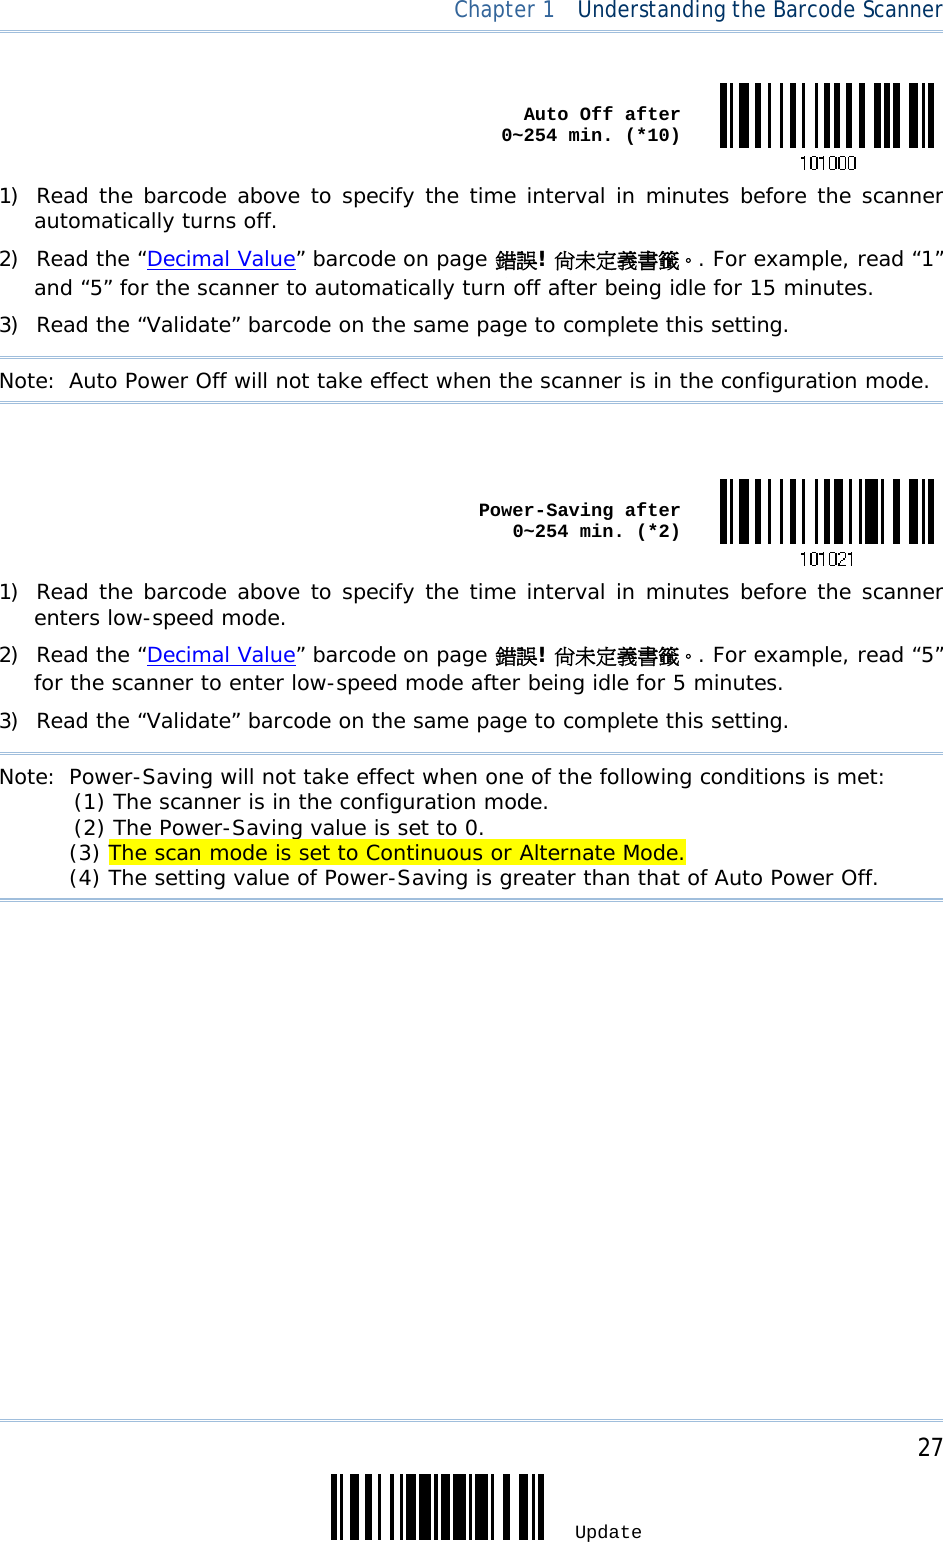     27 Update  Chapter 1  Understanding the Barcode Scanner  Auto Off after  0~254 min. (*10)1) Read the barcode above to specify the time interval in minutes before the scanner automatically turns off. 2) Read the “Decimal Value” barcode on page 錯誤! 尚未定義書籤。. For example, read “1” and “5” for the scanner to automatically turn off after being idle for 15 minutes.  3) Read the “Validate” barcode on the same page to complete this setting. Note:  Auto Power Off will not take effect when the scanner is in the configuration mode.   Power-Saving after  0~254 min. (*2)1) Read the barcode above to specify the time interval in minutes before the scanner enters low-speed mode. 2) Read the “Decimal Value” barcode on page 錯誤! 尚未定義書籤。. For example, read “5” for the scanner to enter low-speed mode after being idle for 5 minutes.  3) Read the “Validate” barcode on the same page to complete this setting. Note:  Power-Saving will not take effect when one of the following conditions is met:   (1) The scanner is in the configuration mode.            (2) The Power-Saving value is set to 0.                                                    (3) The scan mode is set to Continuous or Alternate Mode.                                       (4) The setting value of Power-Saving is greater than that of Auto Power Off.  